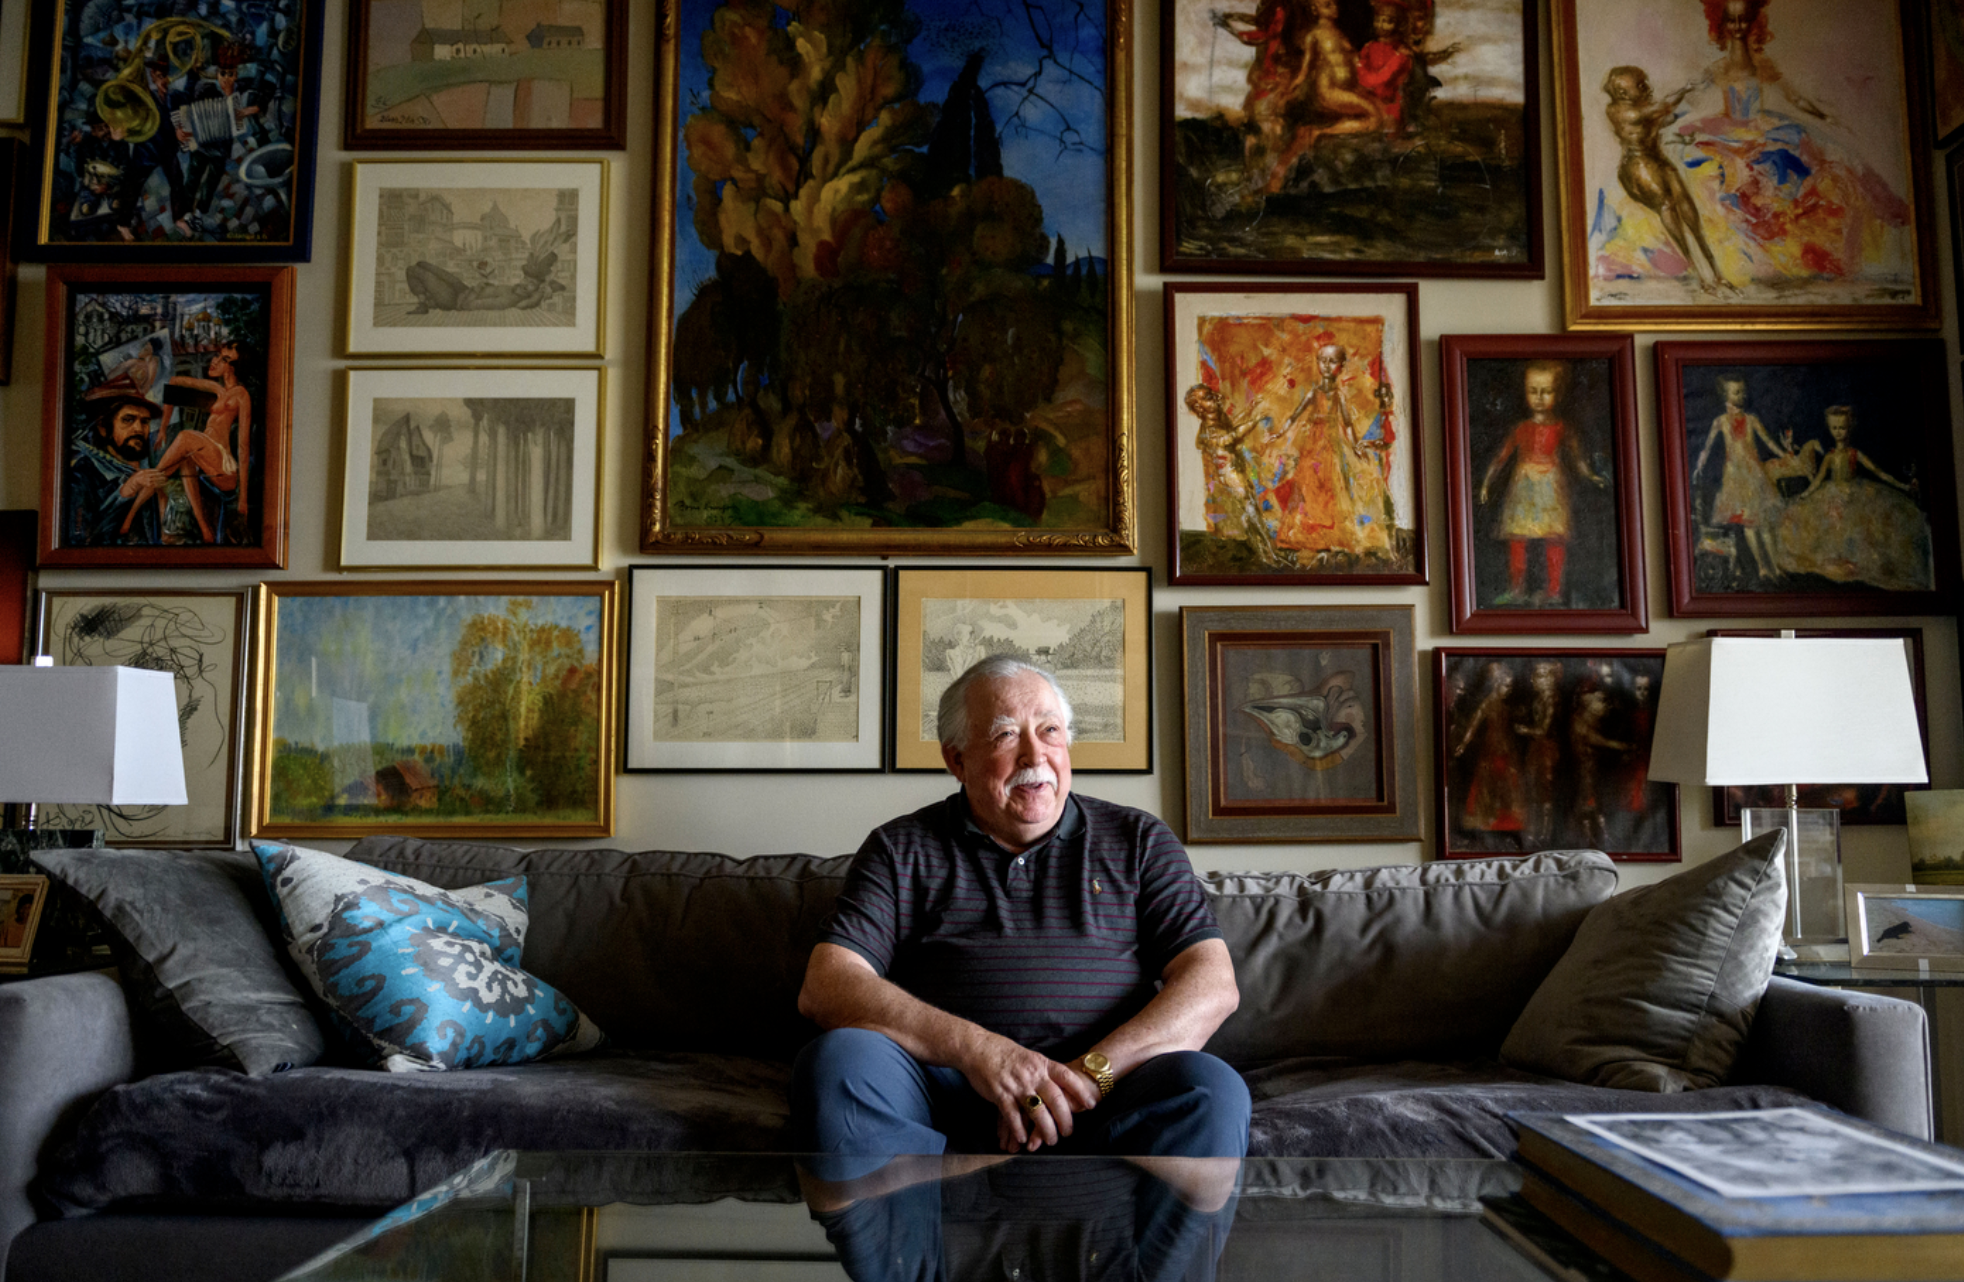 Vladimir Torchilin is the definition of a Renaissance man. Outside his work as a distinguished biochemist at Northeastern University, he has made a name for himself as an art collector and published fiction author. Photo by Matthew Modoono/Northeastern University